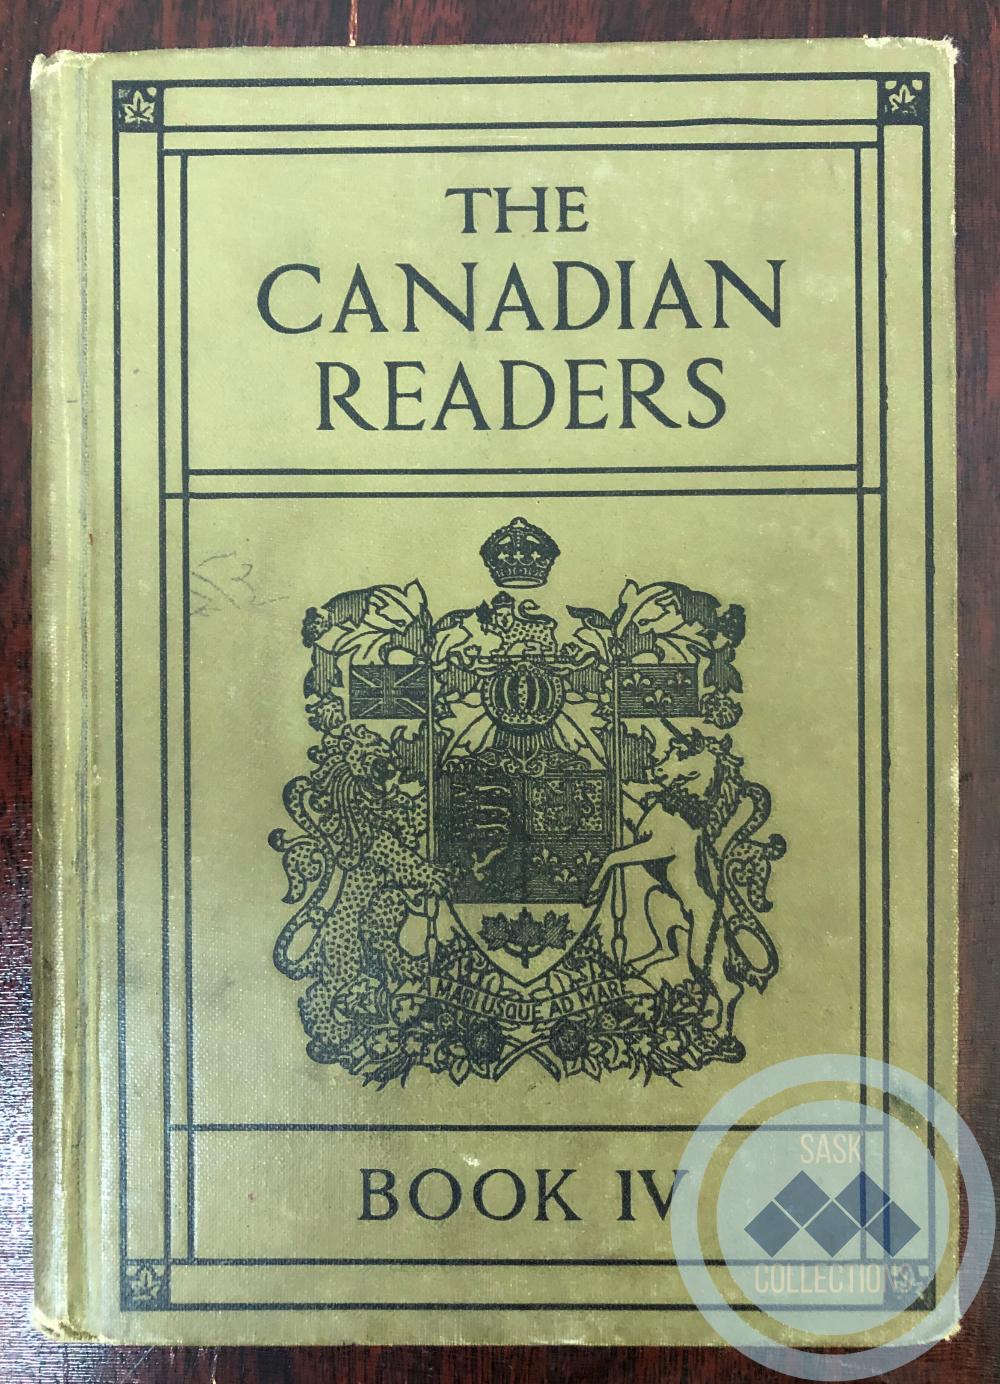 Canadian Readers - Book IV